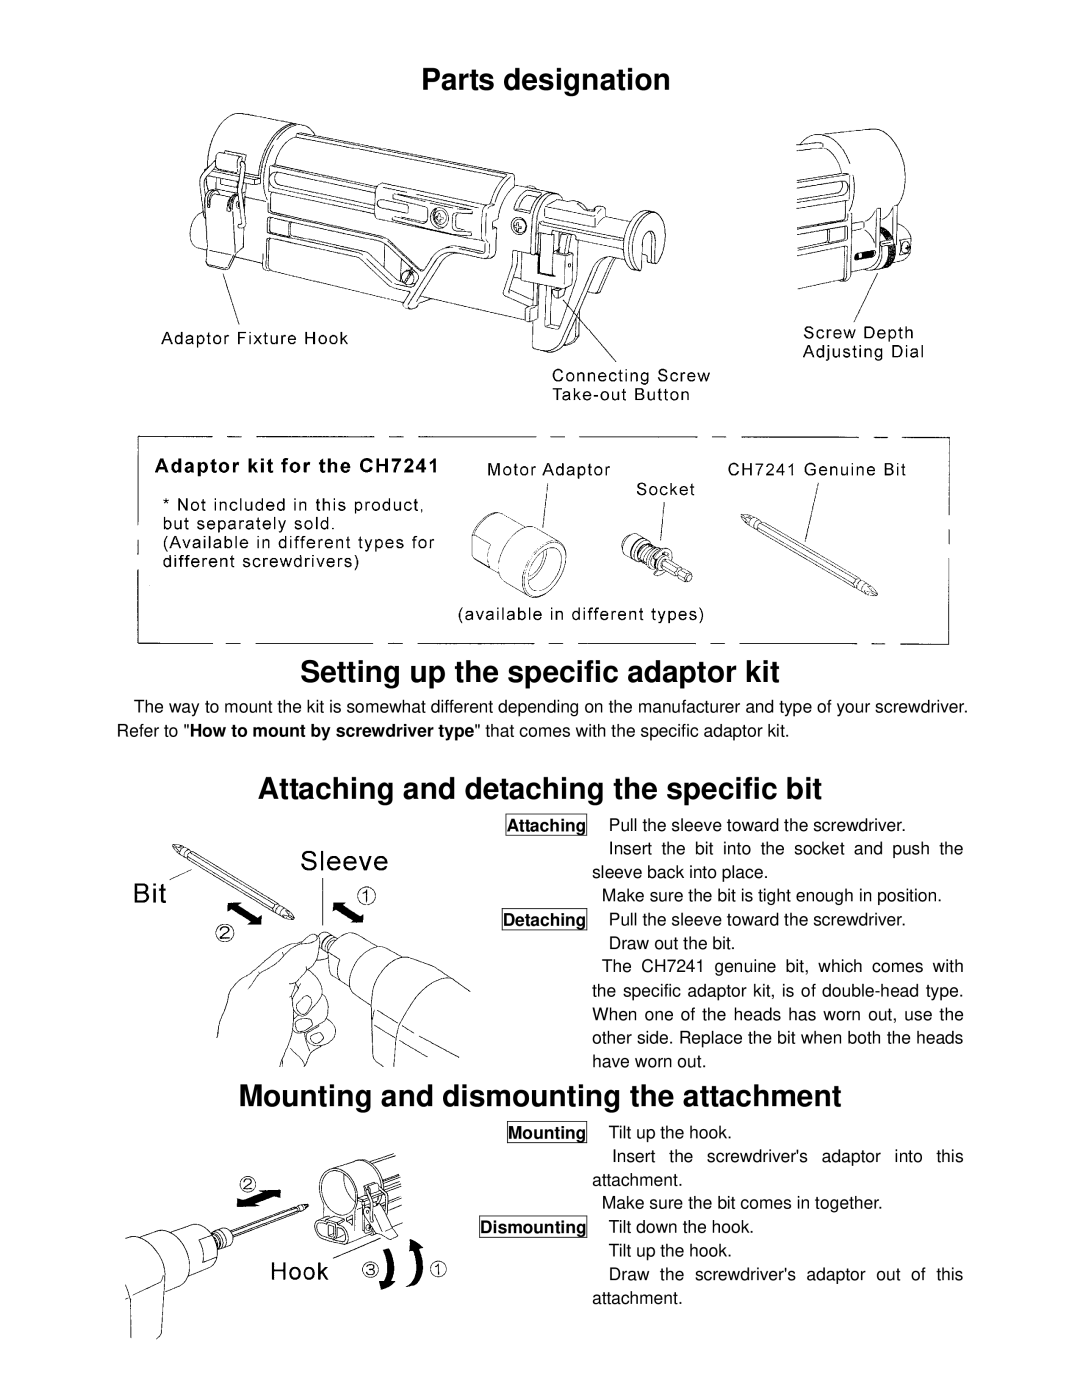 MURO CH7241U manual Parts designation Setting up the specific adaptor kit, Attaching and detaching the specific bit 